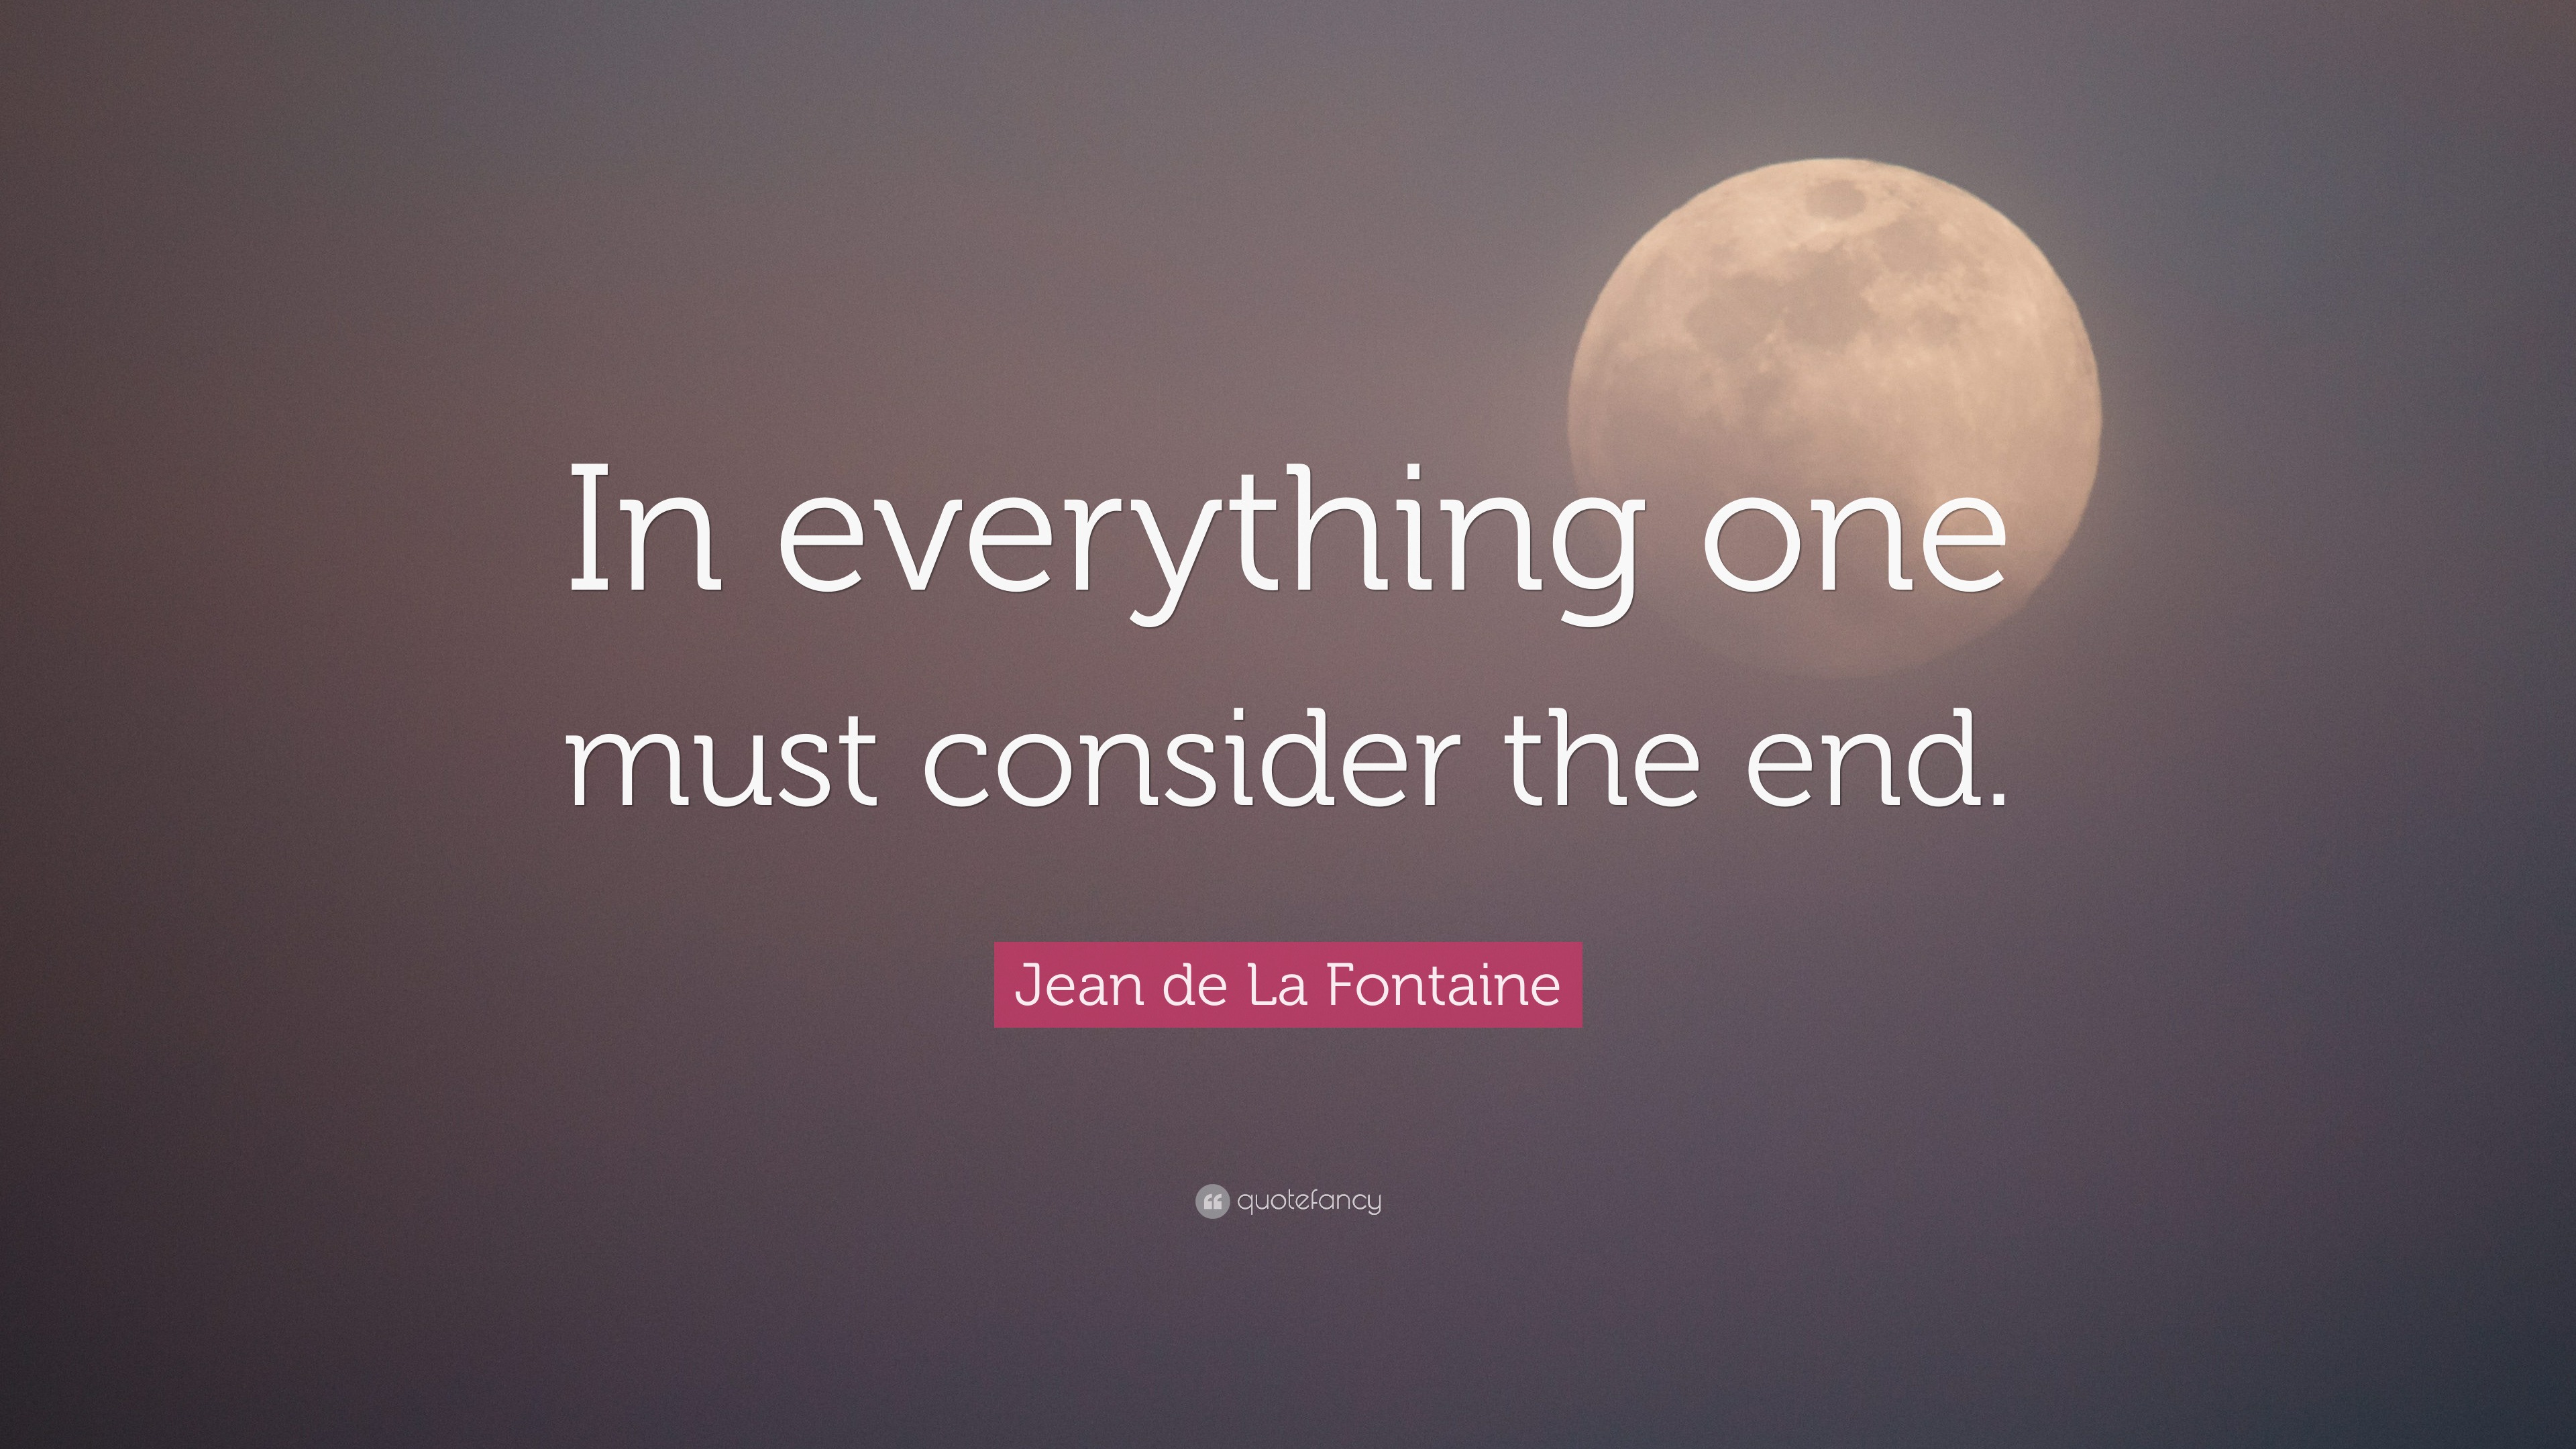 Jean de La Fontaine Quote: “In everything one must consider the end.”